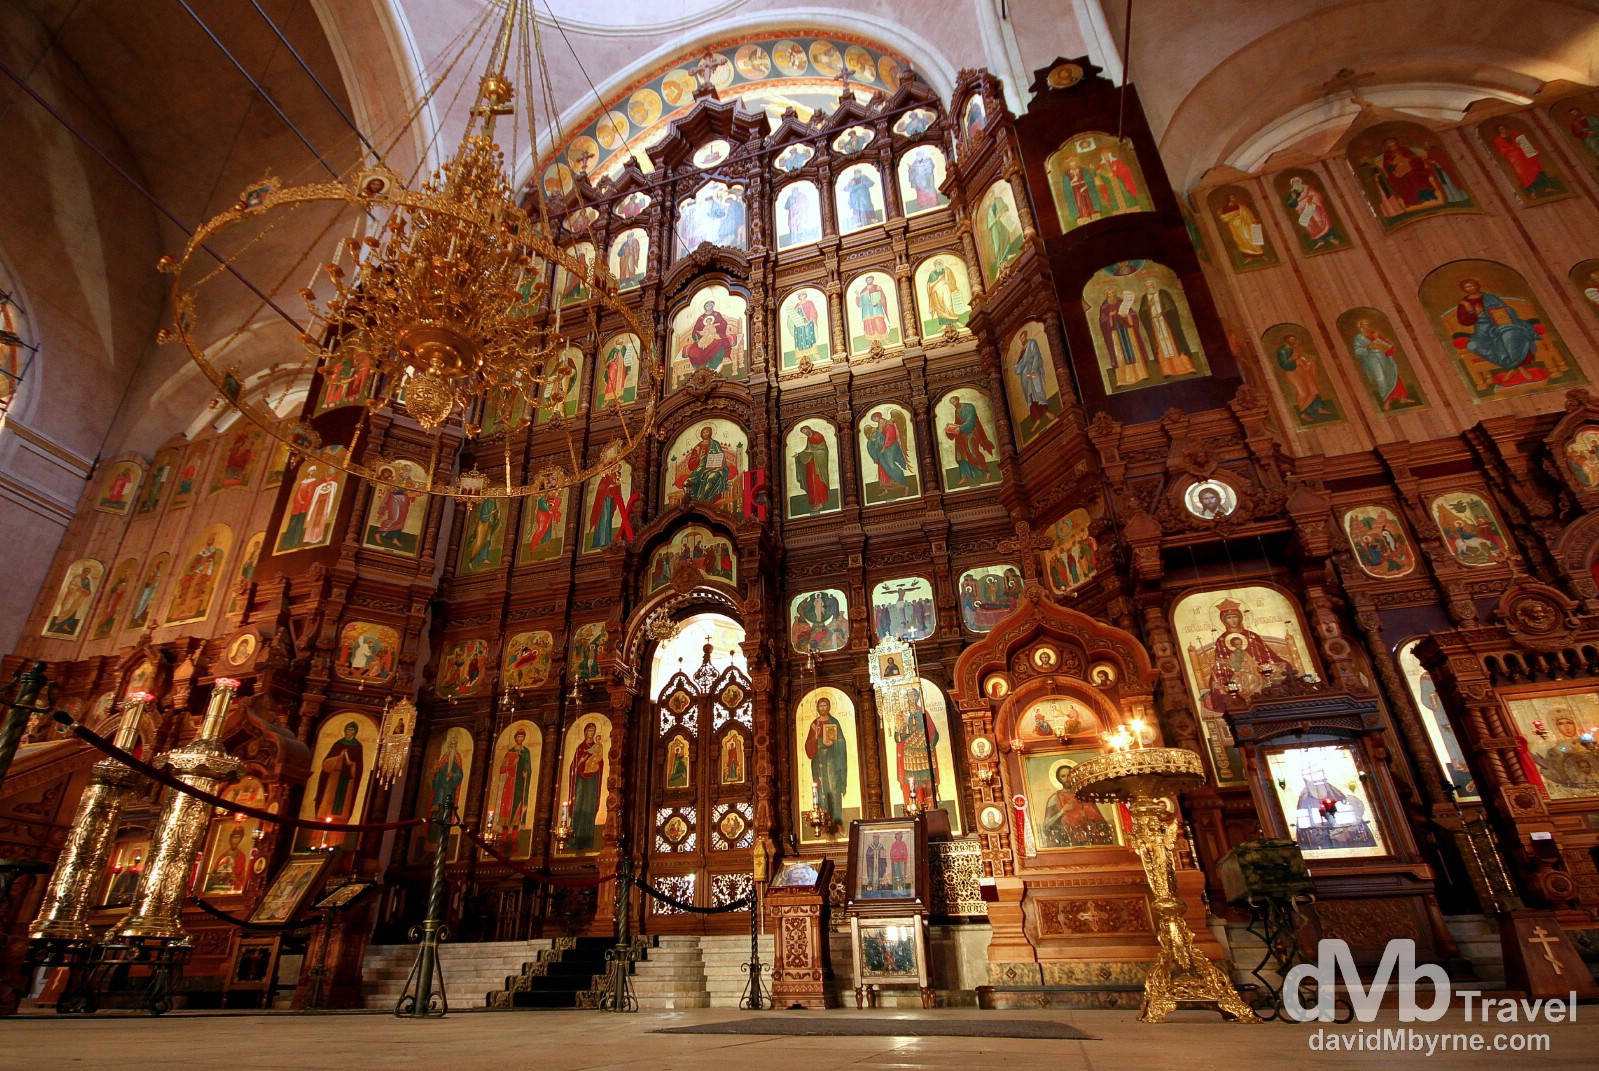 A section of the interior of the New Fair Cathedral (Alexander Nevsky Cathedral) Nizhny Novgorod, Russia. November 14th 2012.